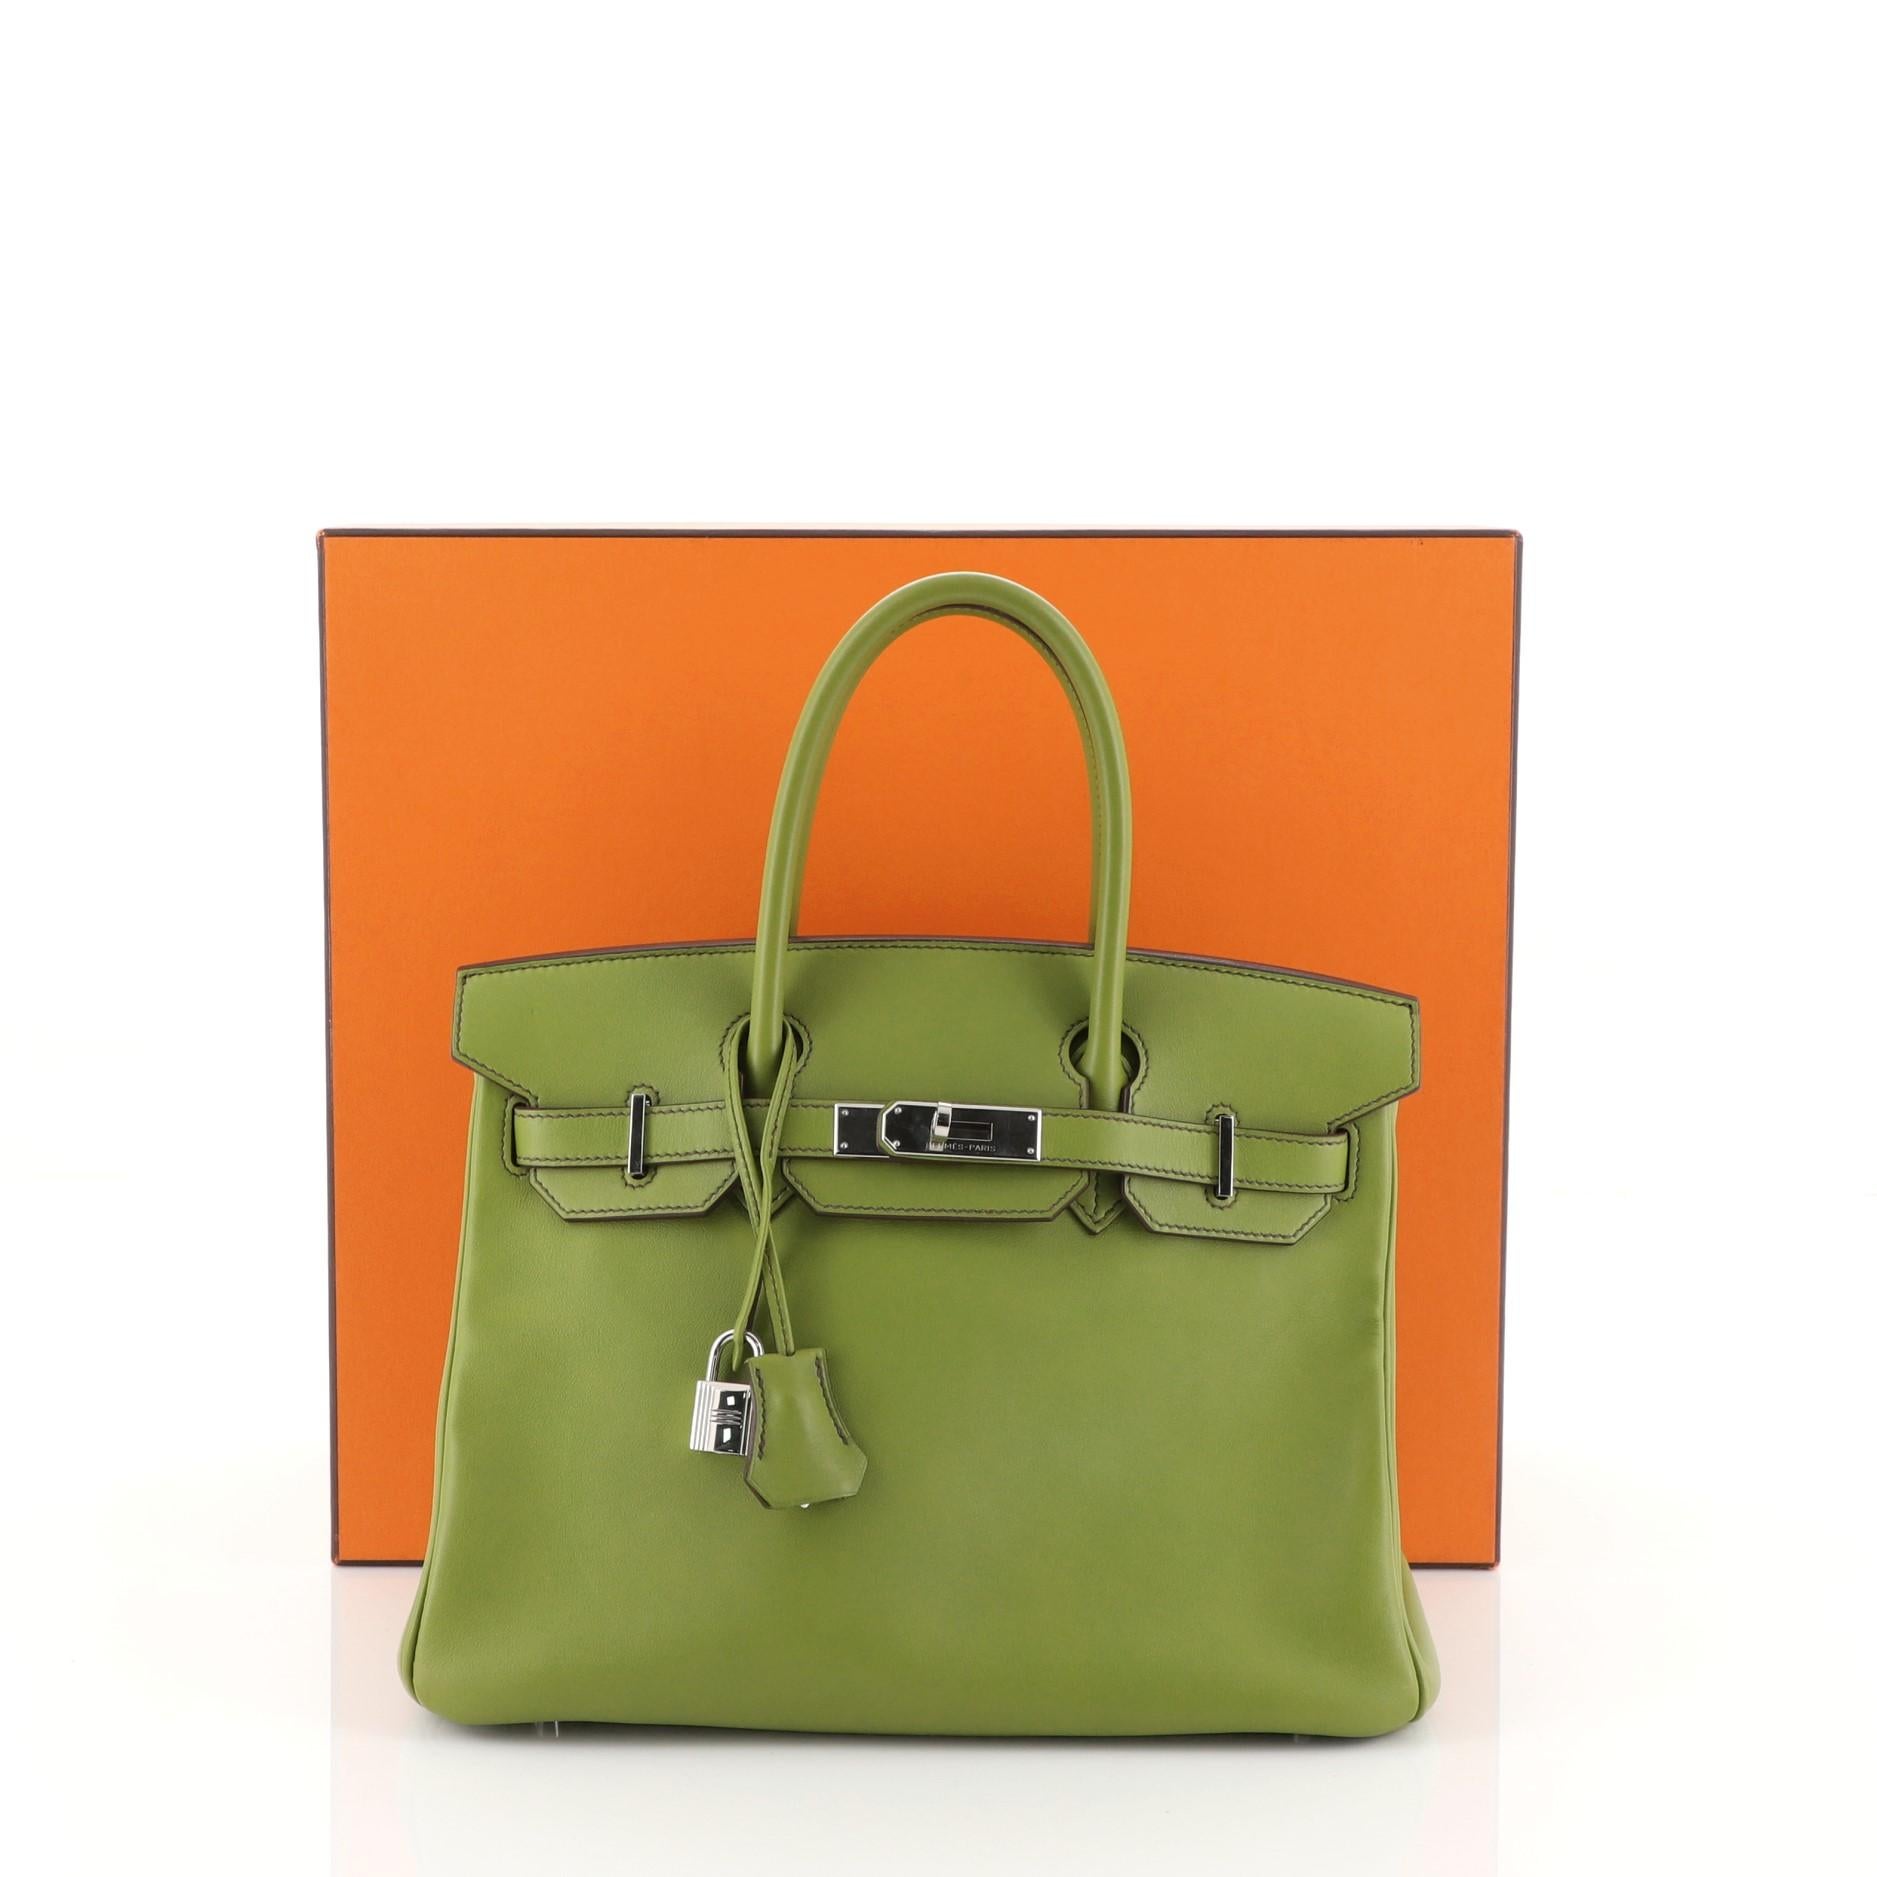 This Hermes Birkin Handbag Vert Anis Swift with Palladium Hardware 30, crafted in Vert Anis green Swift leather, features dual rolled top handles, frontal flap, and palladium hardware. Its turn-lock closure opens to a Vert Anis green Swift leather